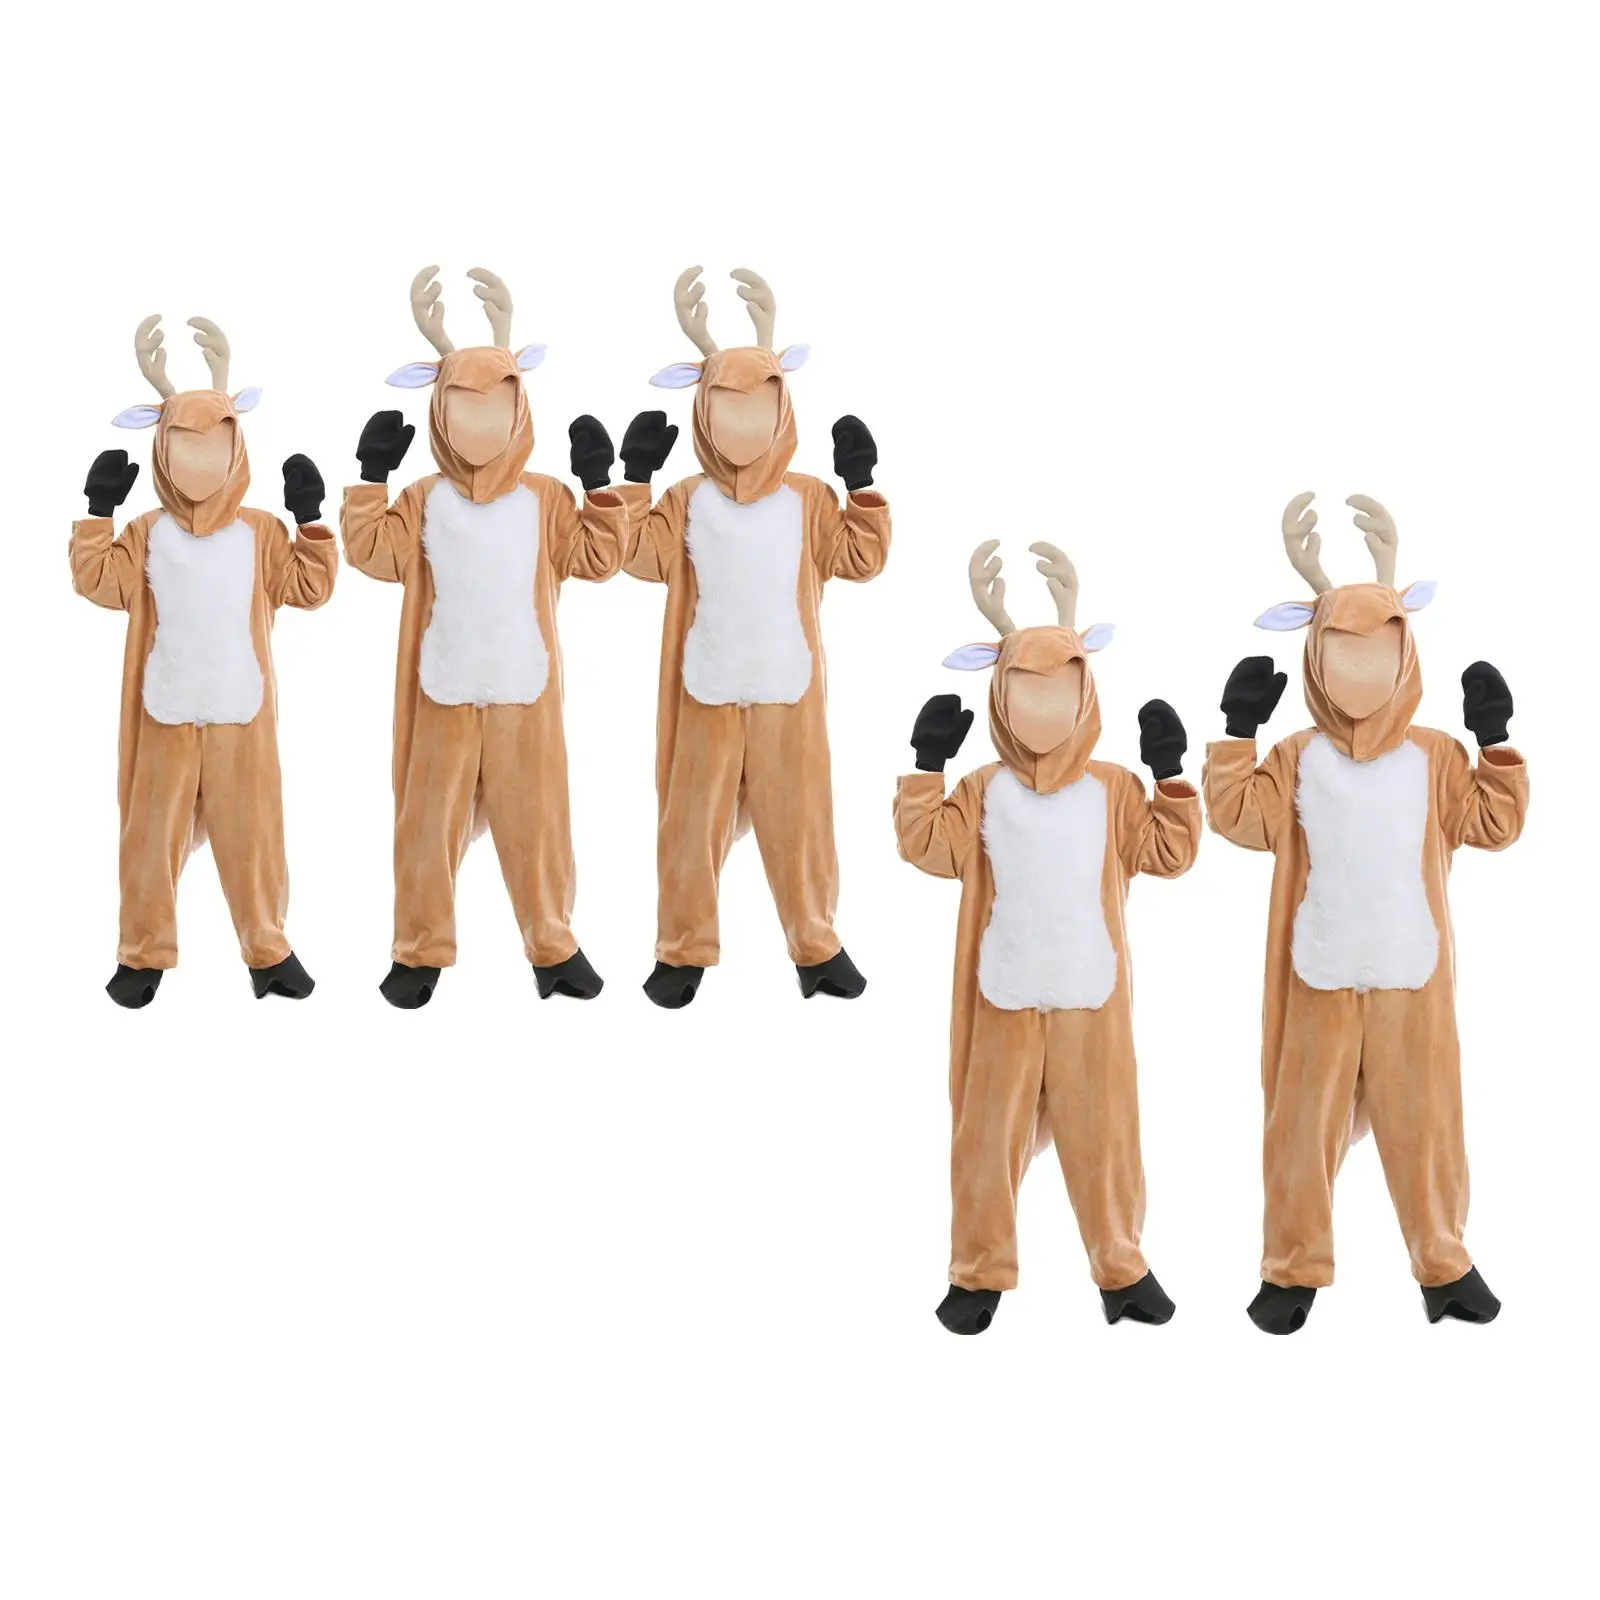 Christmas Costume Jumpsuit Men Women Kids Photo Props Reindeer Costume for Fancy Dress Cosplay Party Stage Performance Festival